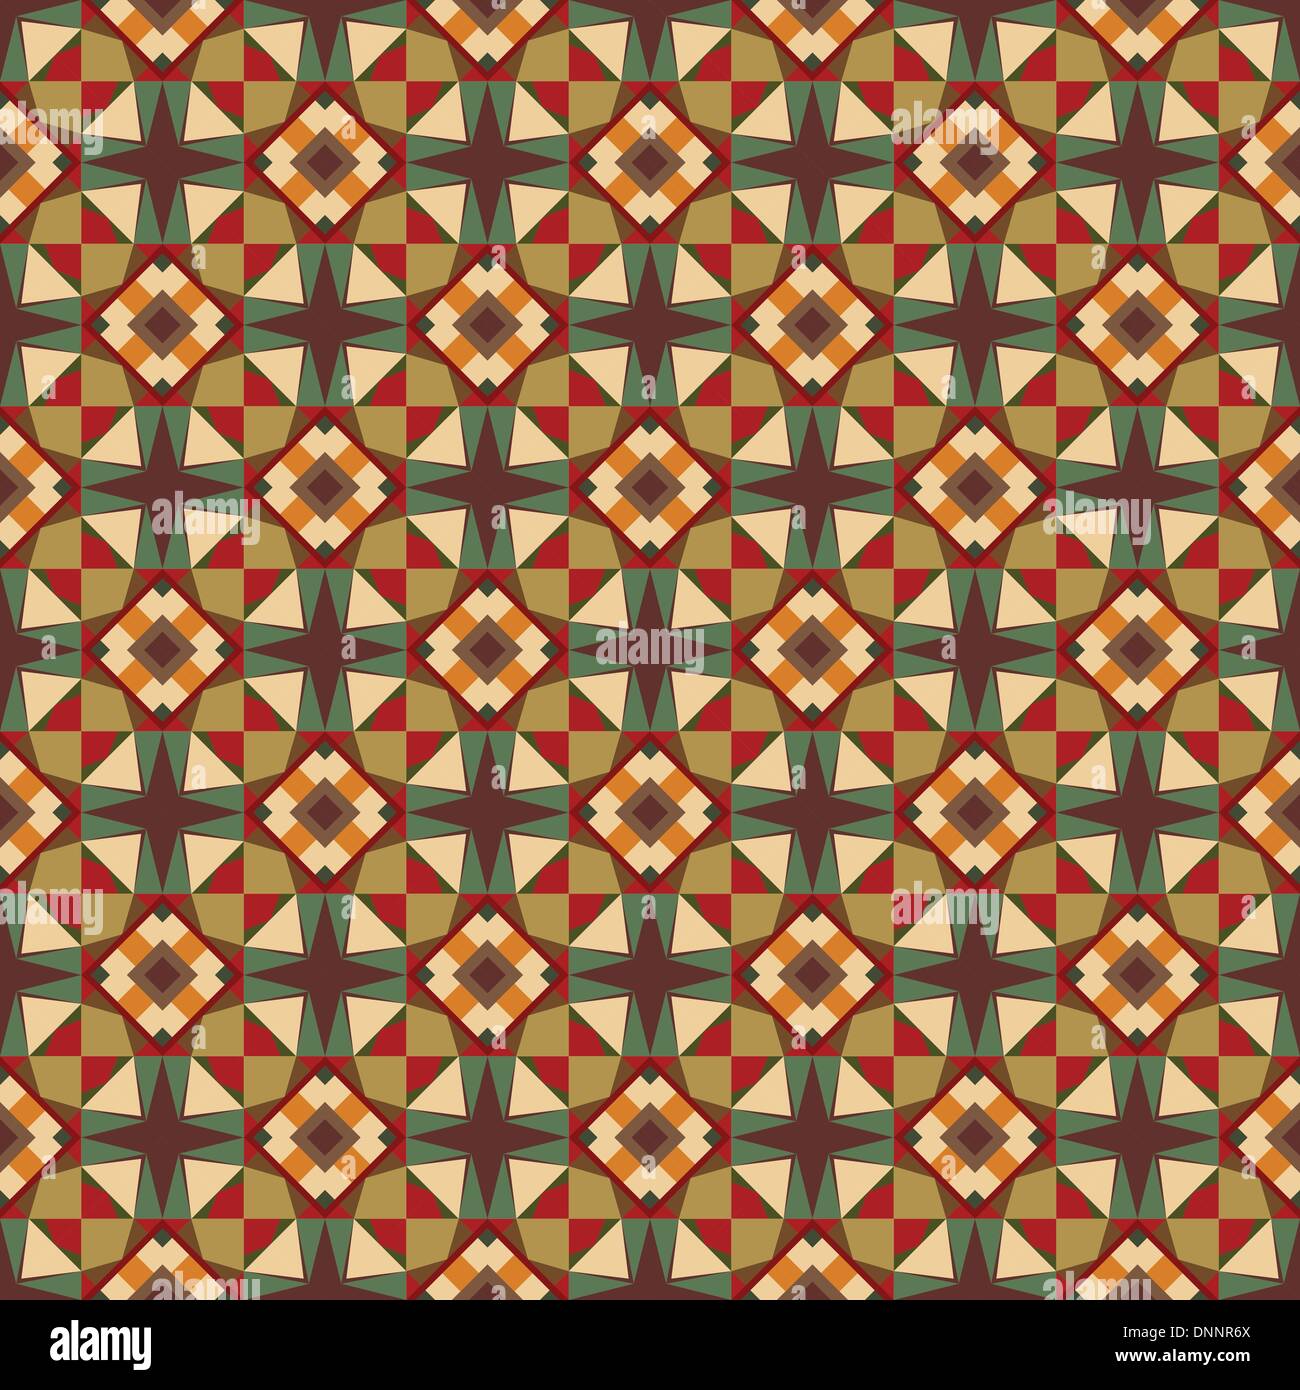 Abstract seamless vector parquet ornate background for design use Stock Vector